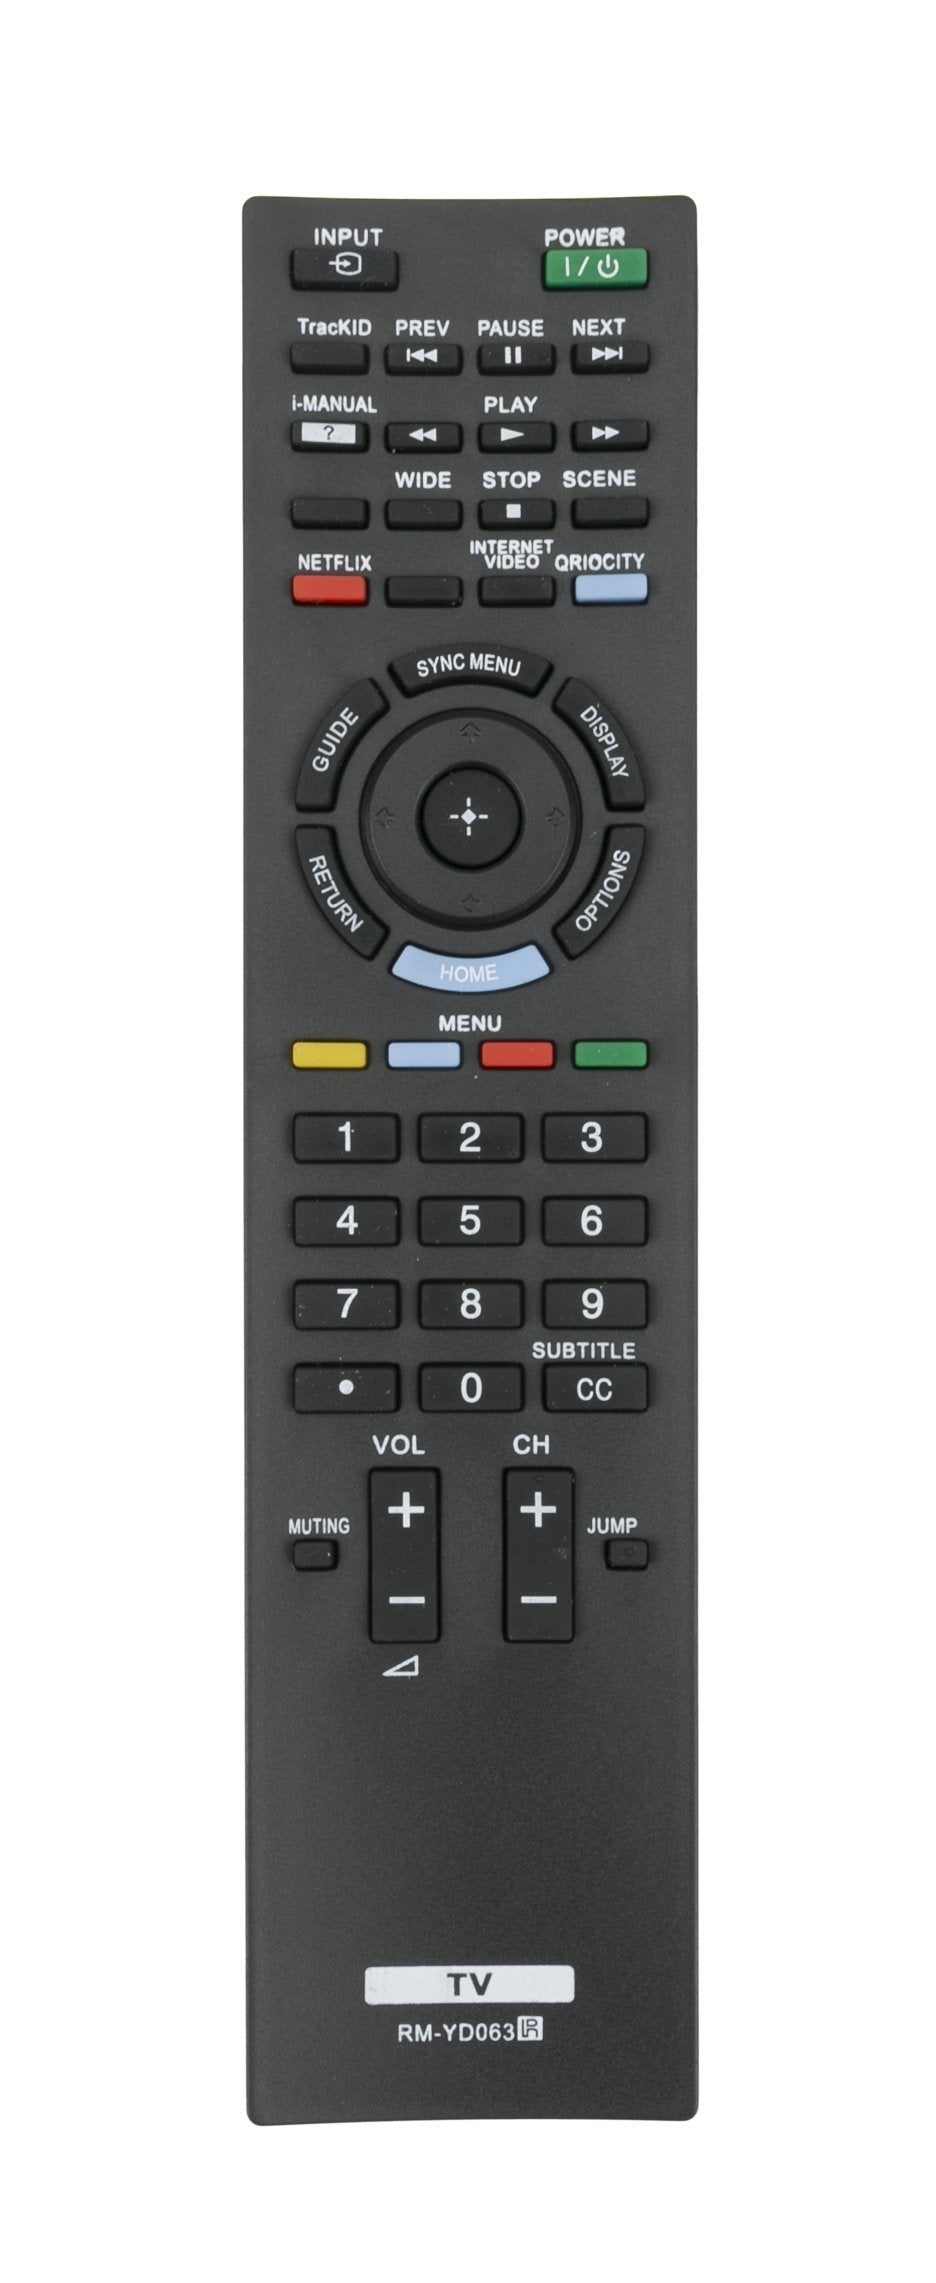 New RM-YD065 Remote Control for Sony Bravia TV KDL32BX321 KDL32BX420 KDL32BX421 KDL40BX420 KDL40BX420B KDL40BX421 KDL46BX420 KDL46BX421 KDL55BX520 KDL22BX320 KDL22BX321 KDL32BX320